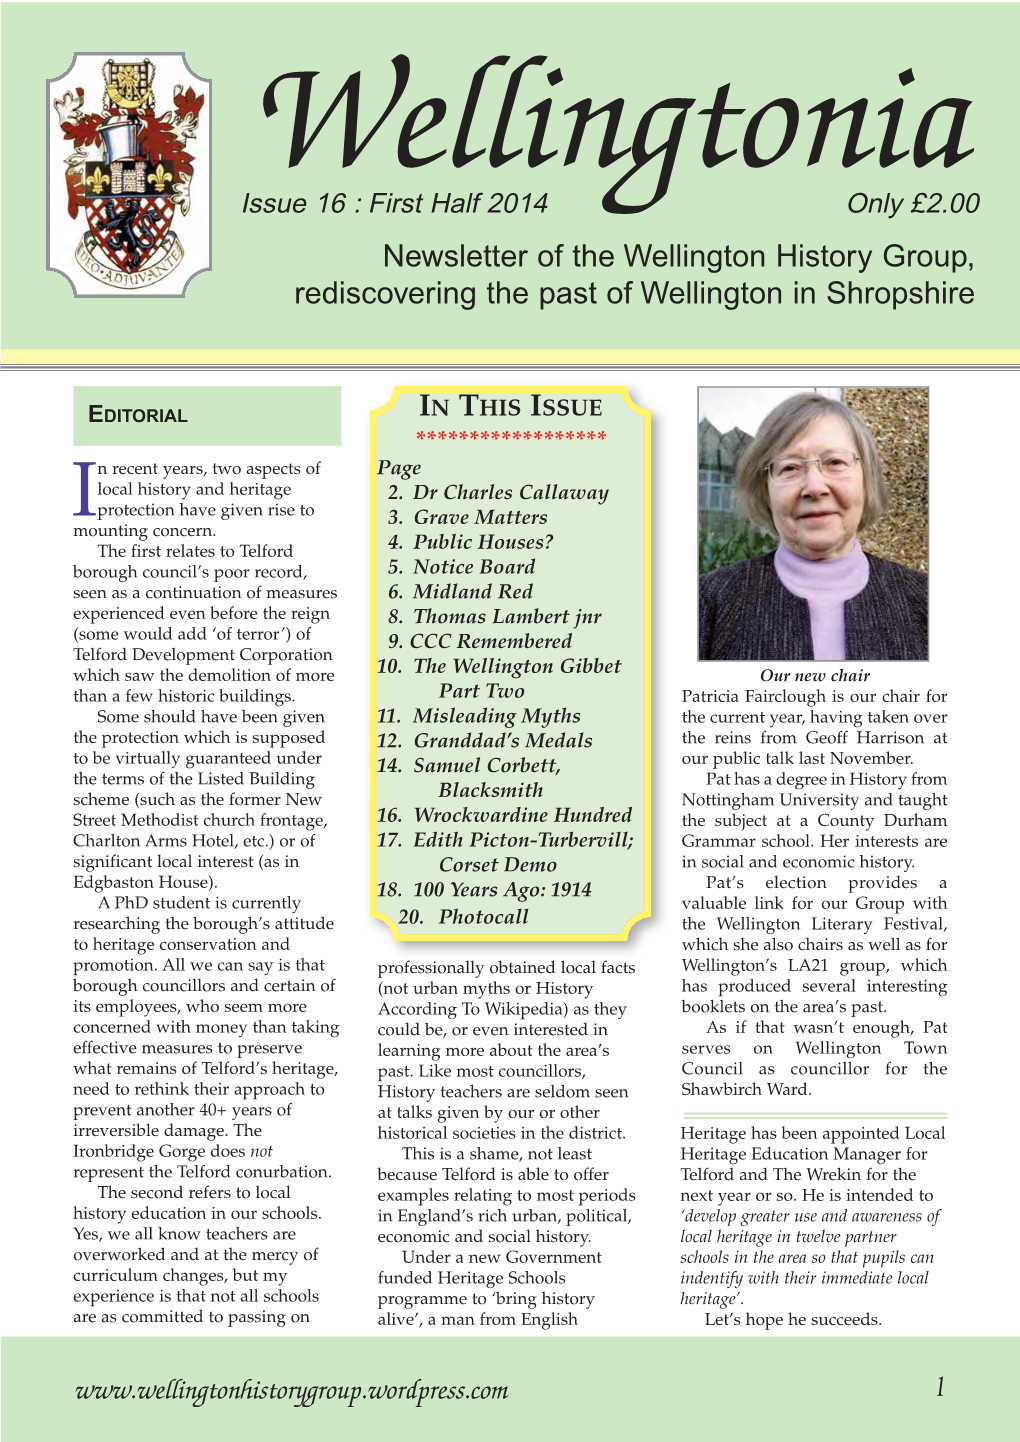 Newsletter of the Wellington History Group, Rediscovering the Past of Wellington in Shropshire